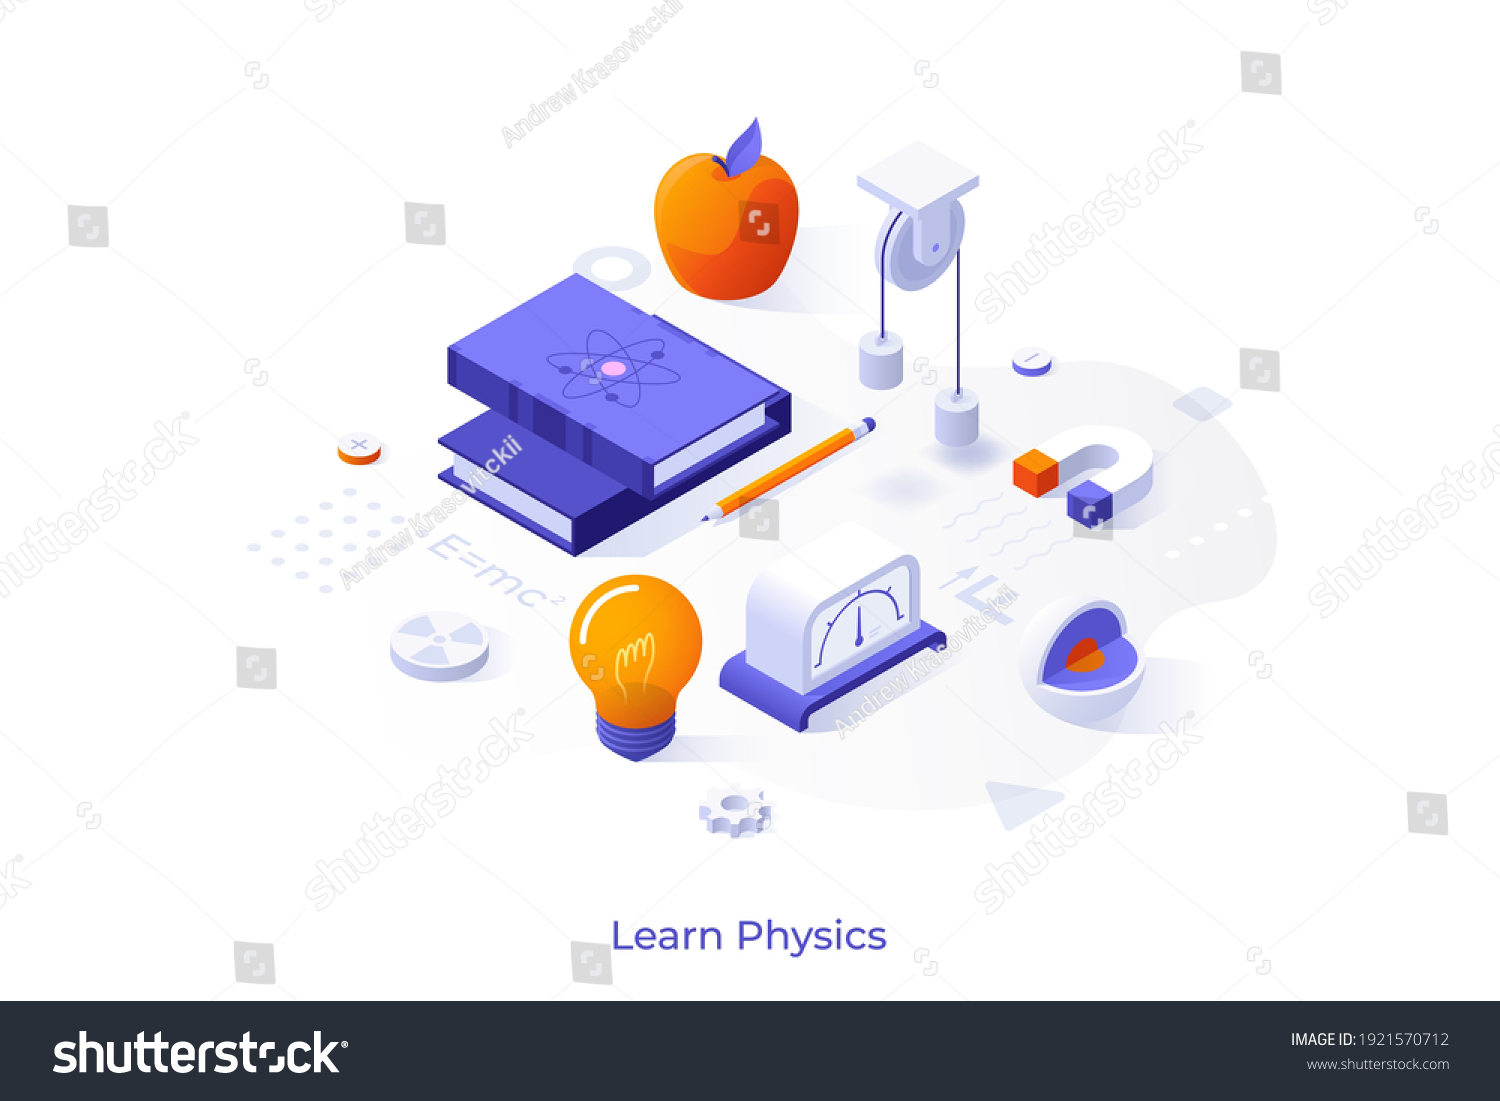 Conceptual template with books and scientific laboratory tools or instruments. Scene for learning physics, studying science, physical research. Modern isometric vector illustration for website. #1921570712